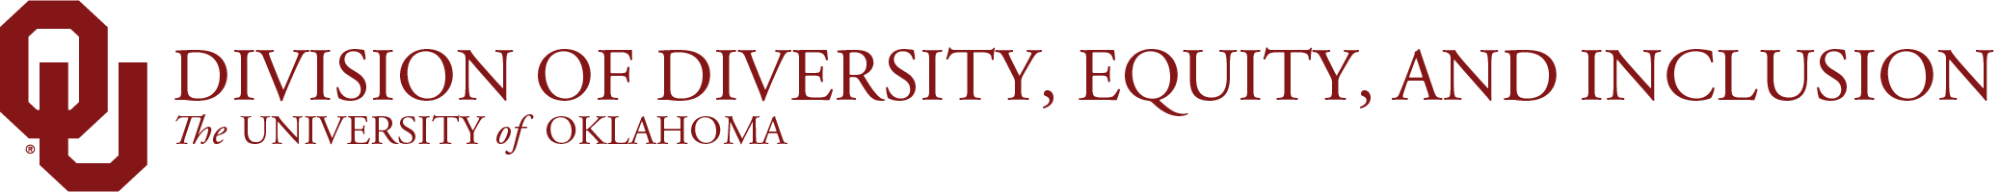 OU Division of Diversity, Equity, and Inclusion, The University of Oklahoma website wordmark